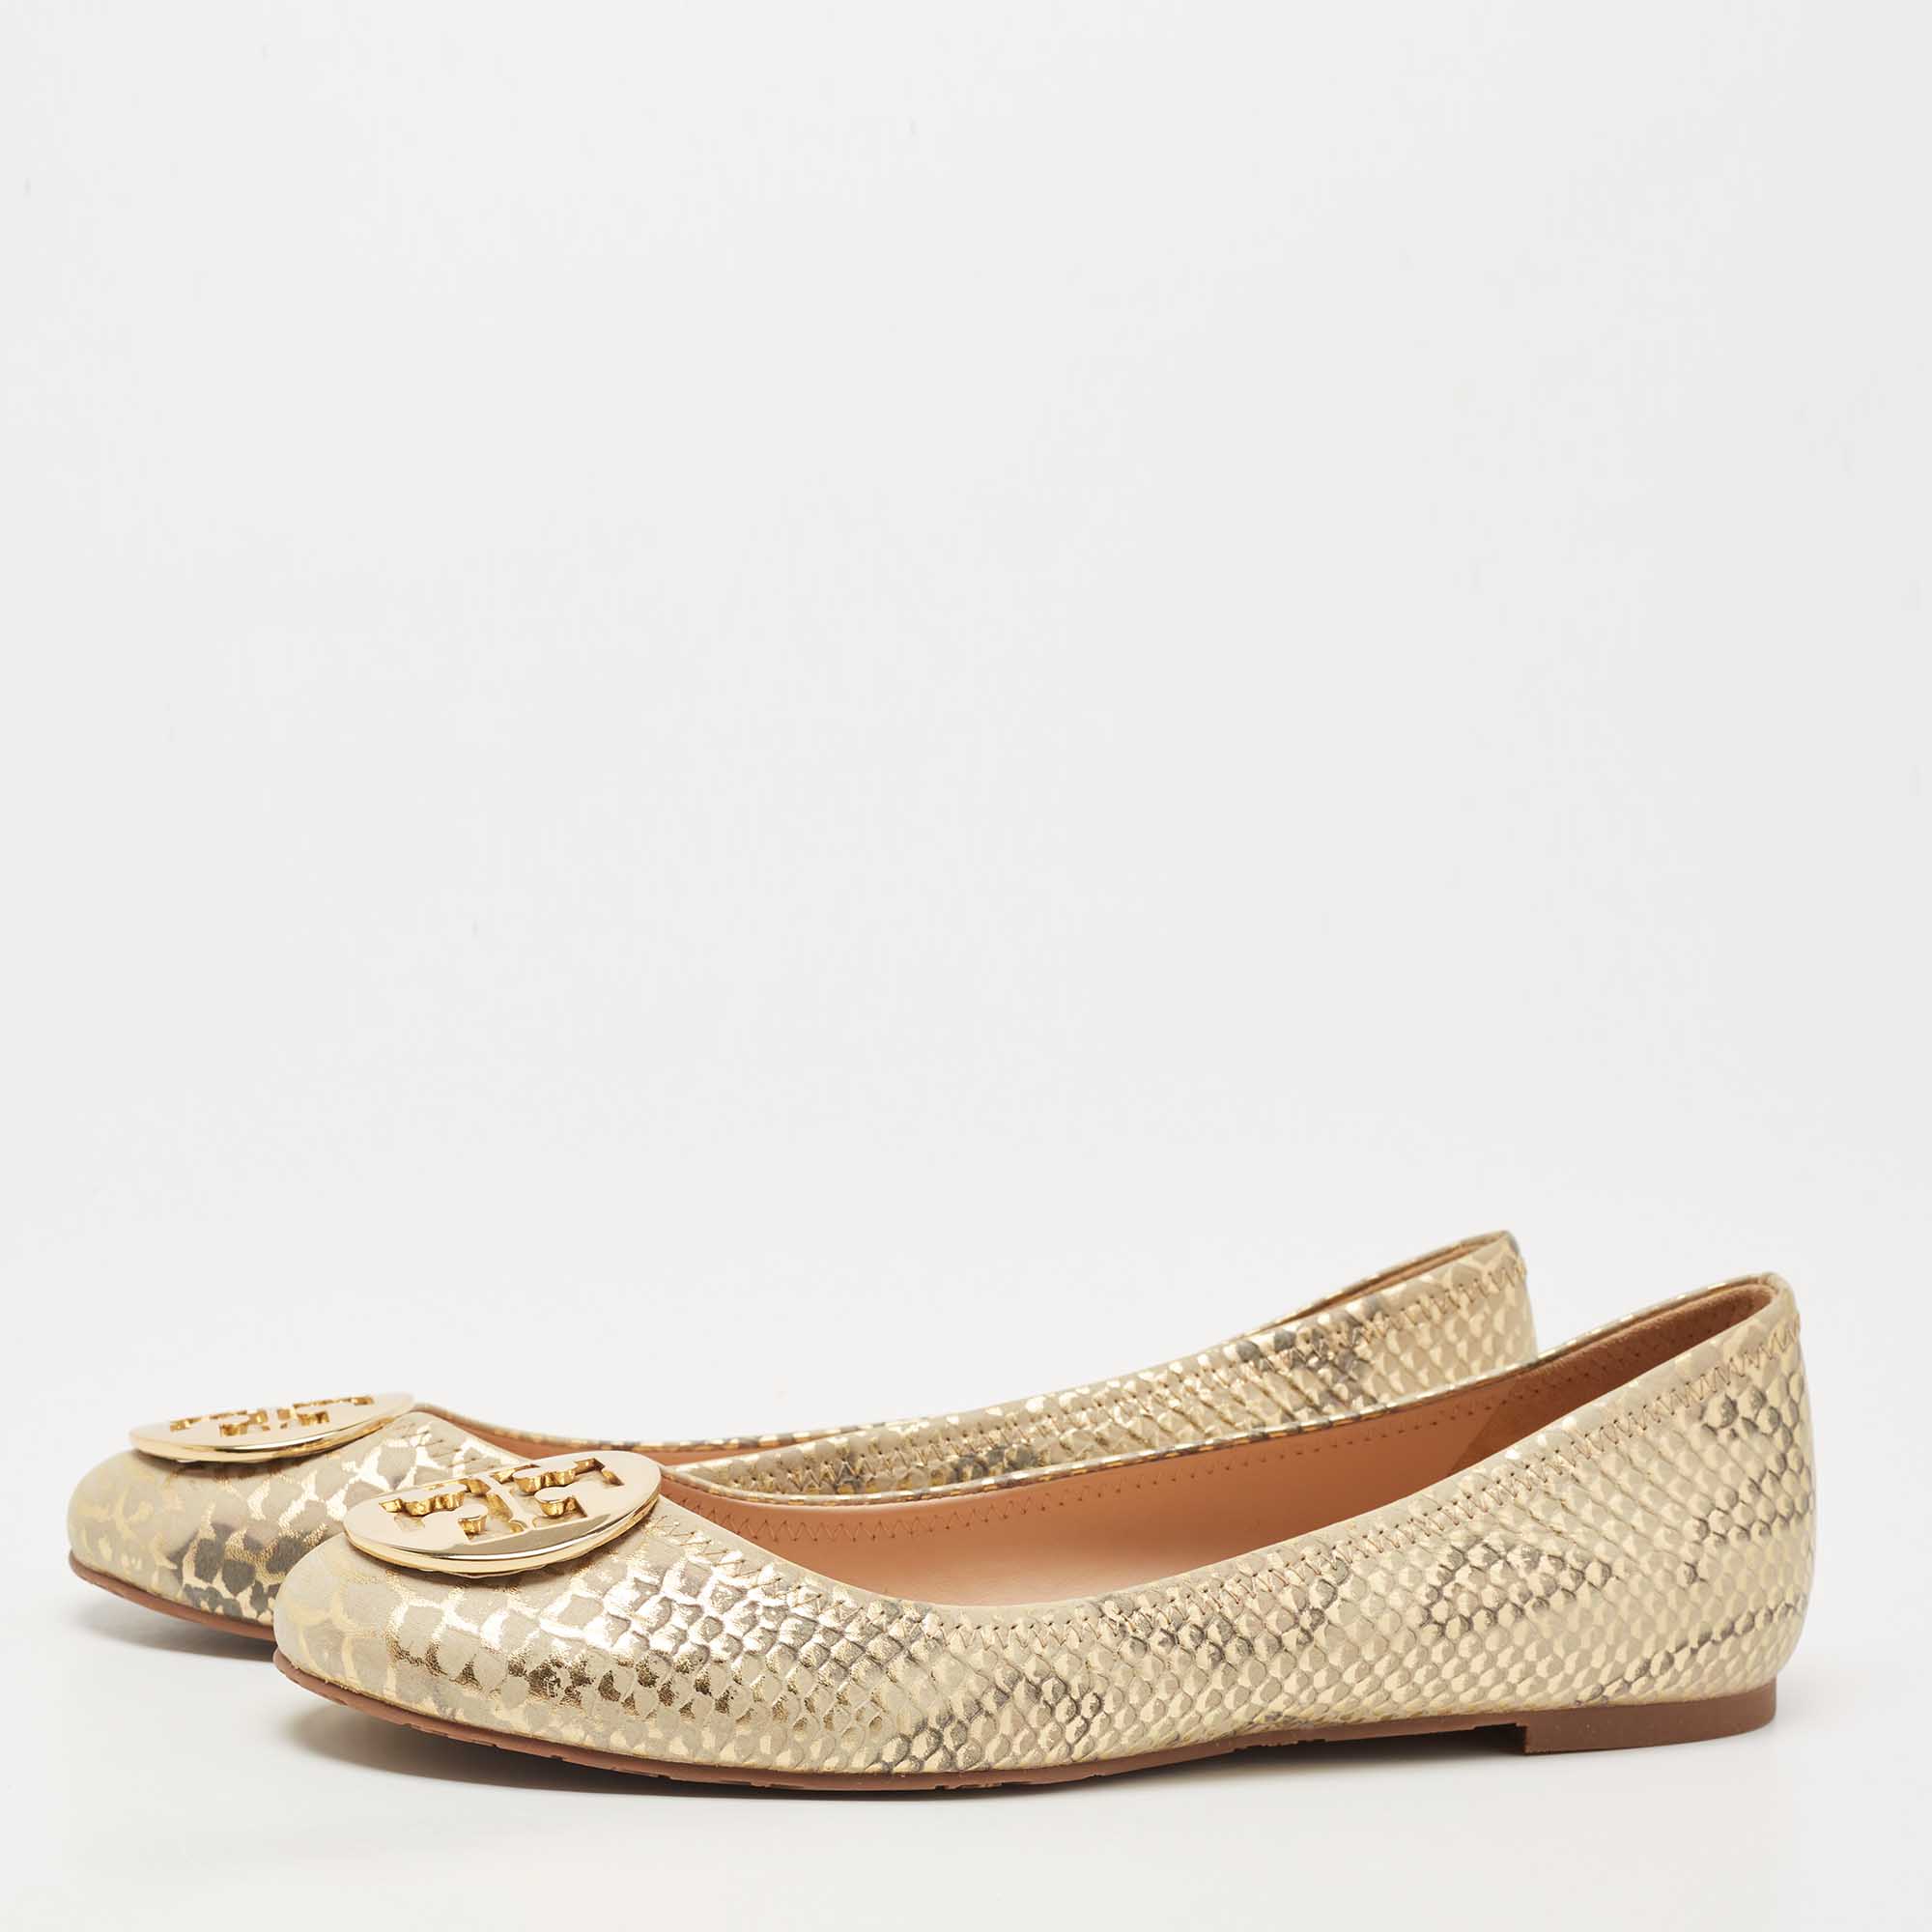 

Tory Burch Two Tone Python Embossed Leather Reva Ballet Flats Size, Gold